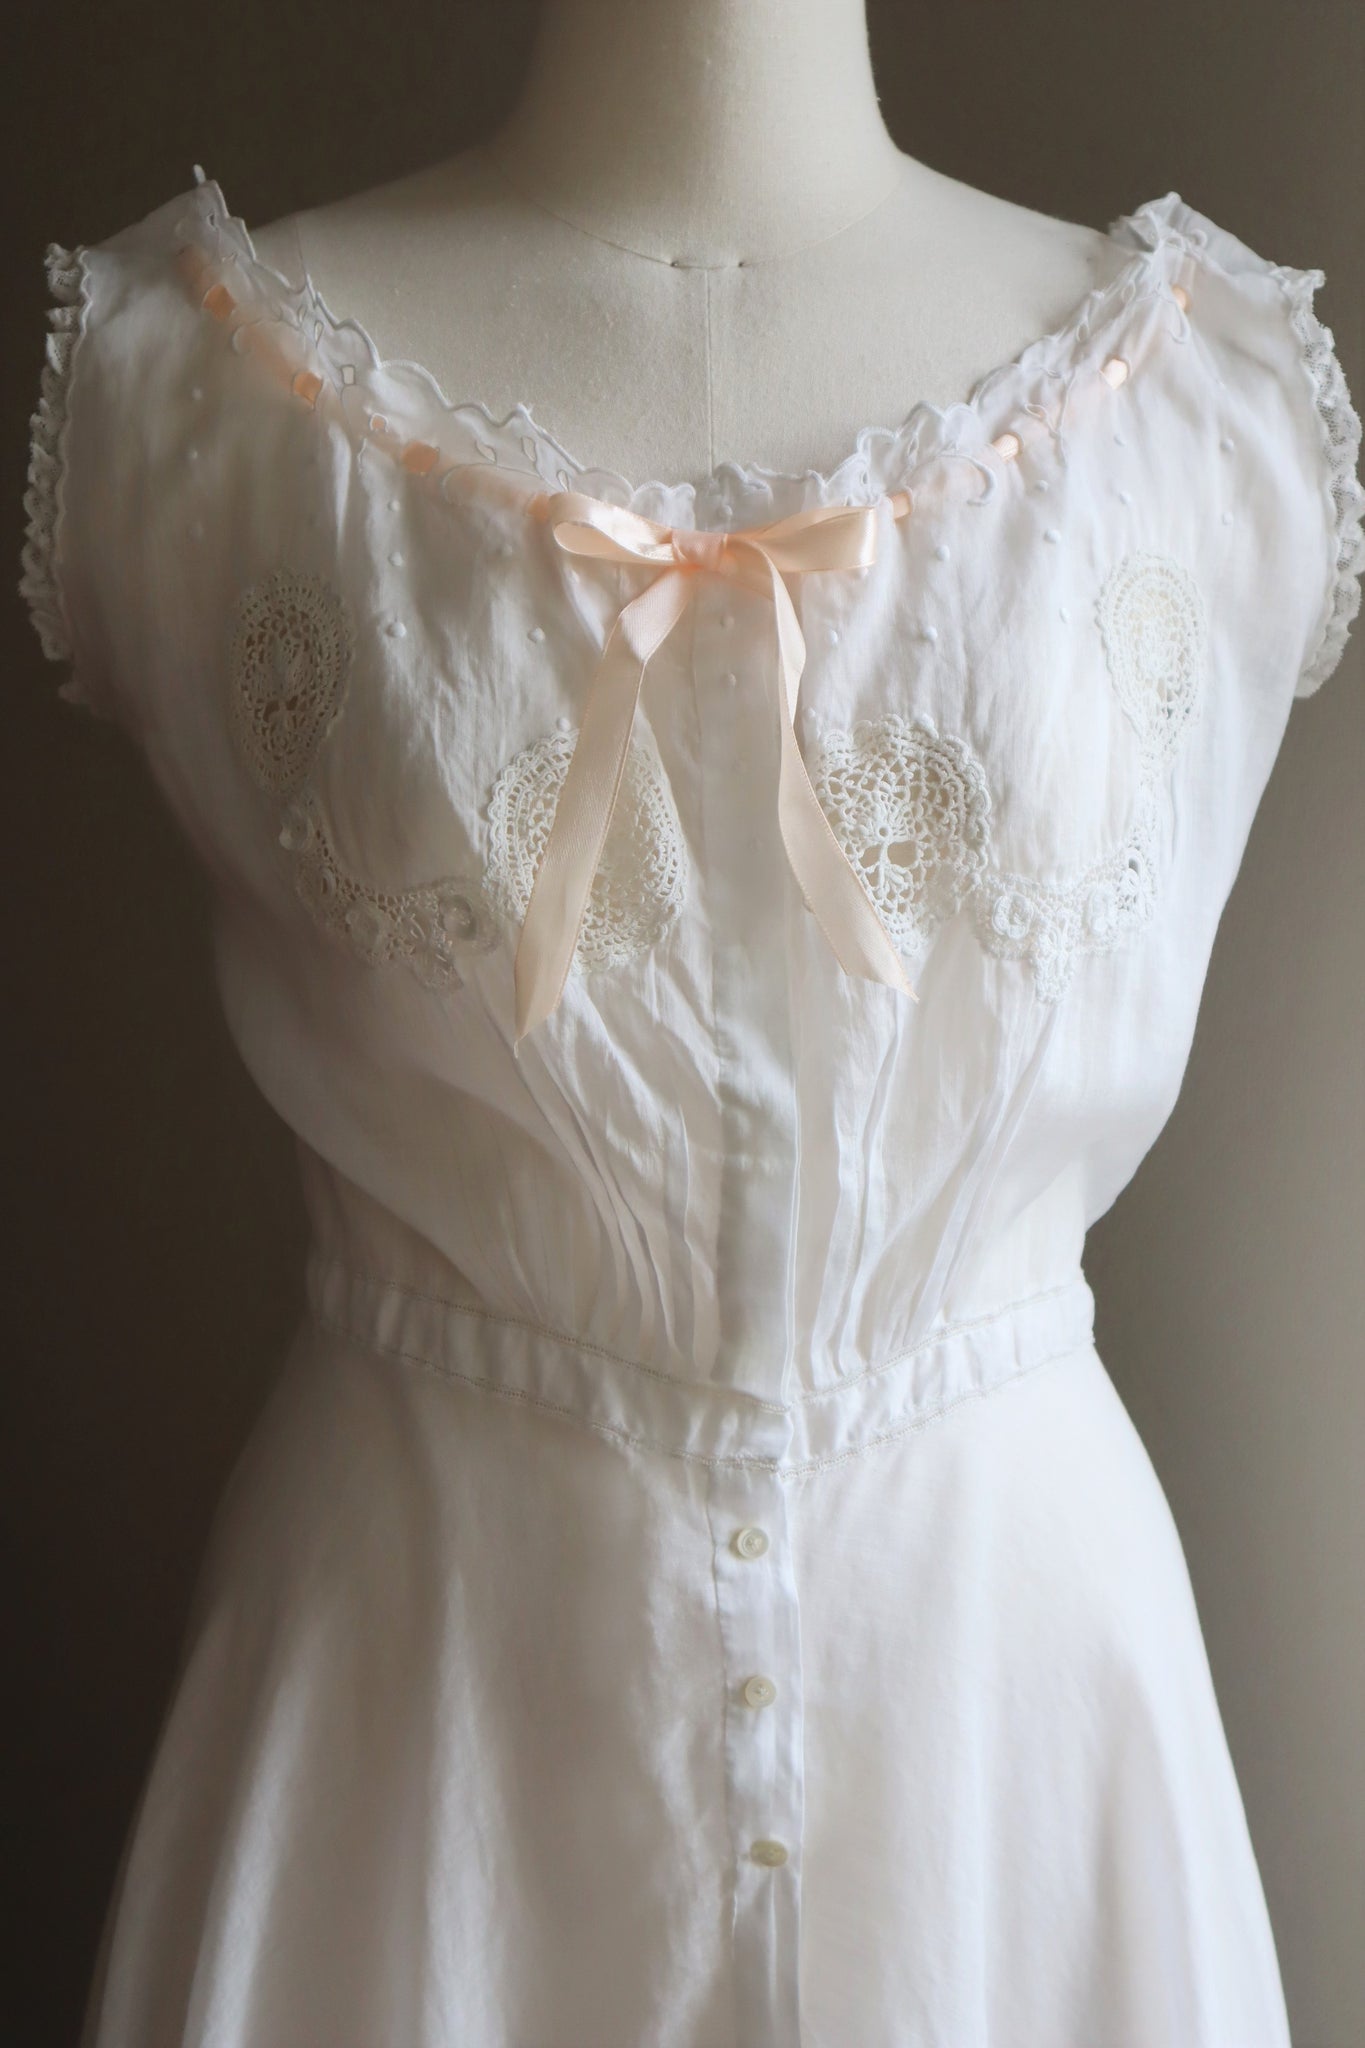 1900s Edwardian Hand Embroidered White Lawn Cotton Romper